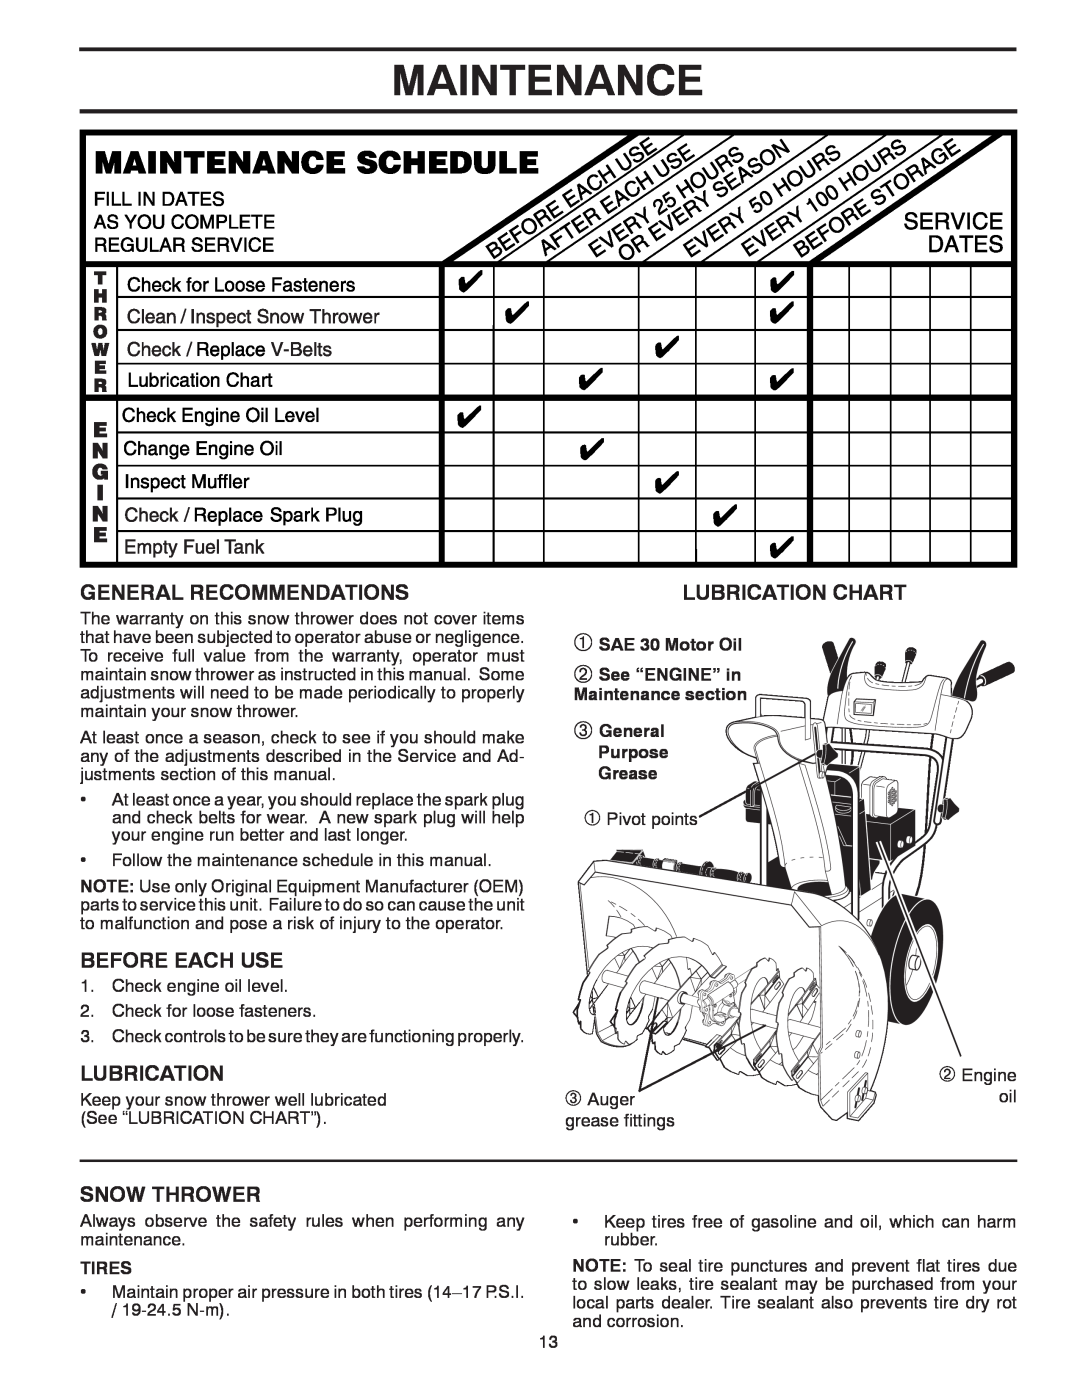 Poulan 422080, XT5524ES Maintenance, General Recommendations, Before Each Use, Snow Thrower, Lubrication Chart, Tires 